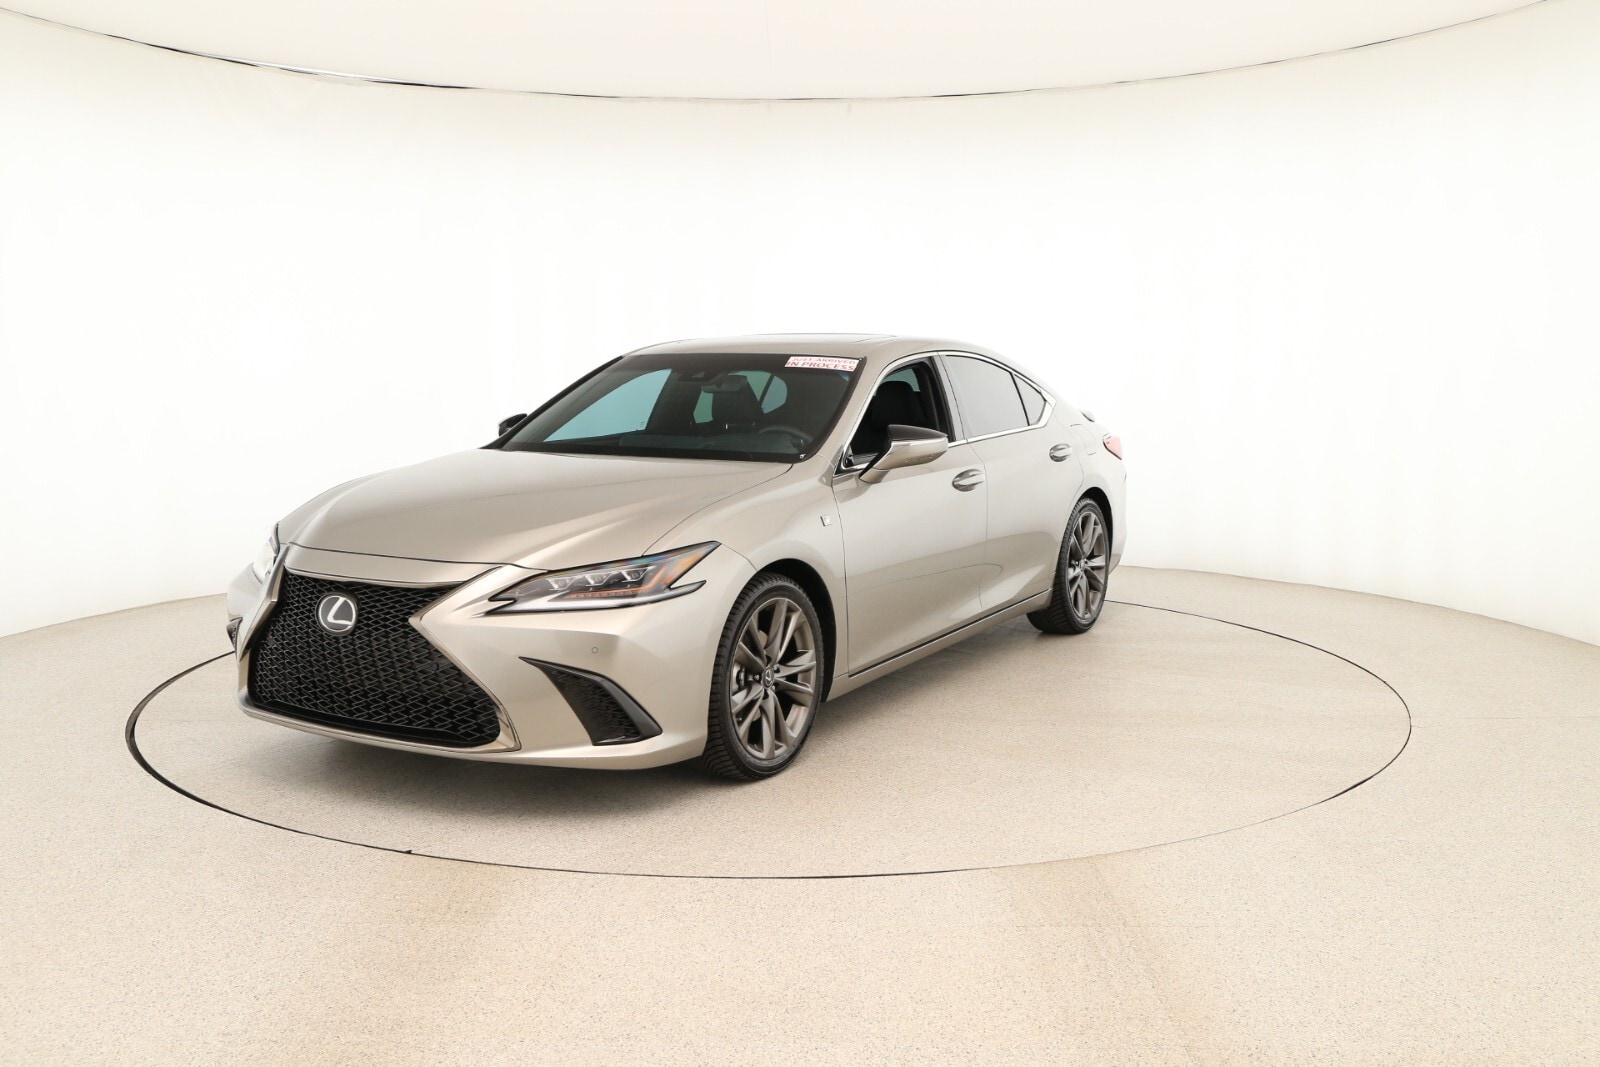 Used 2021 Lexus ES F SPORT with VIN 58AGZ1B1XMU095170 for sale in Henderson, NV